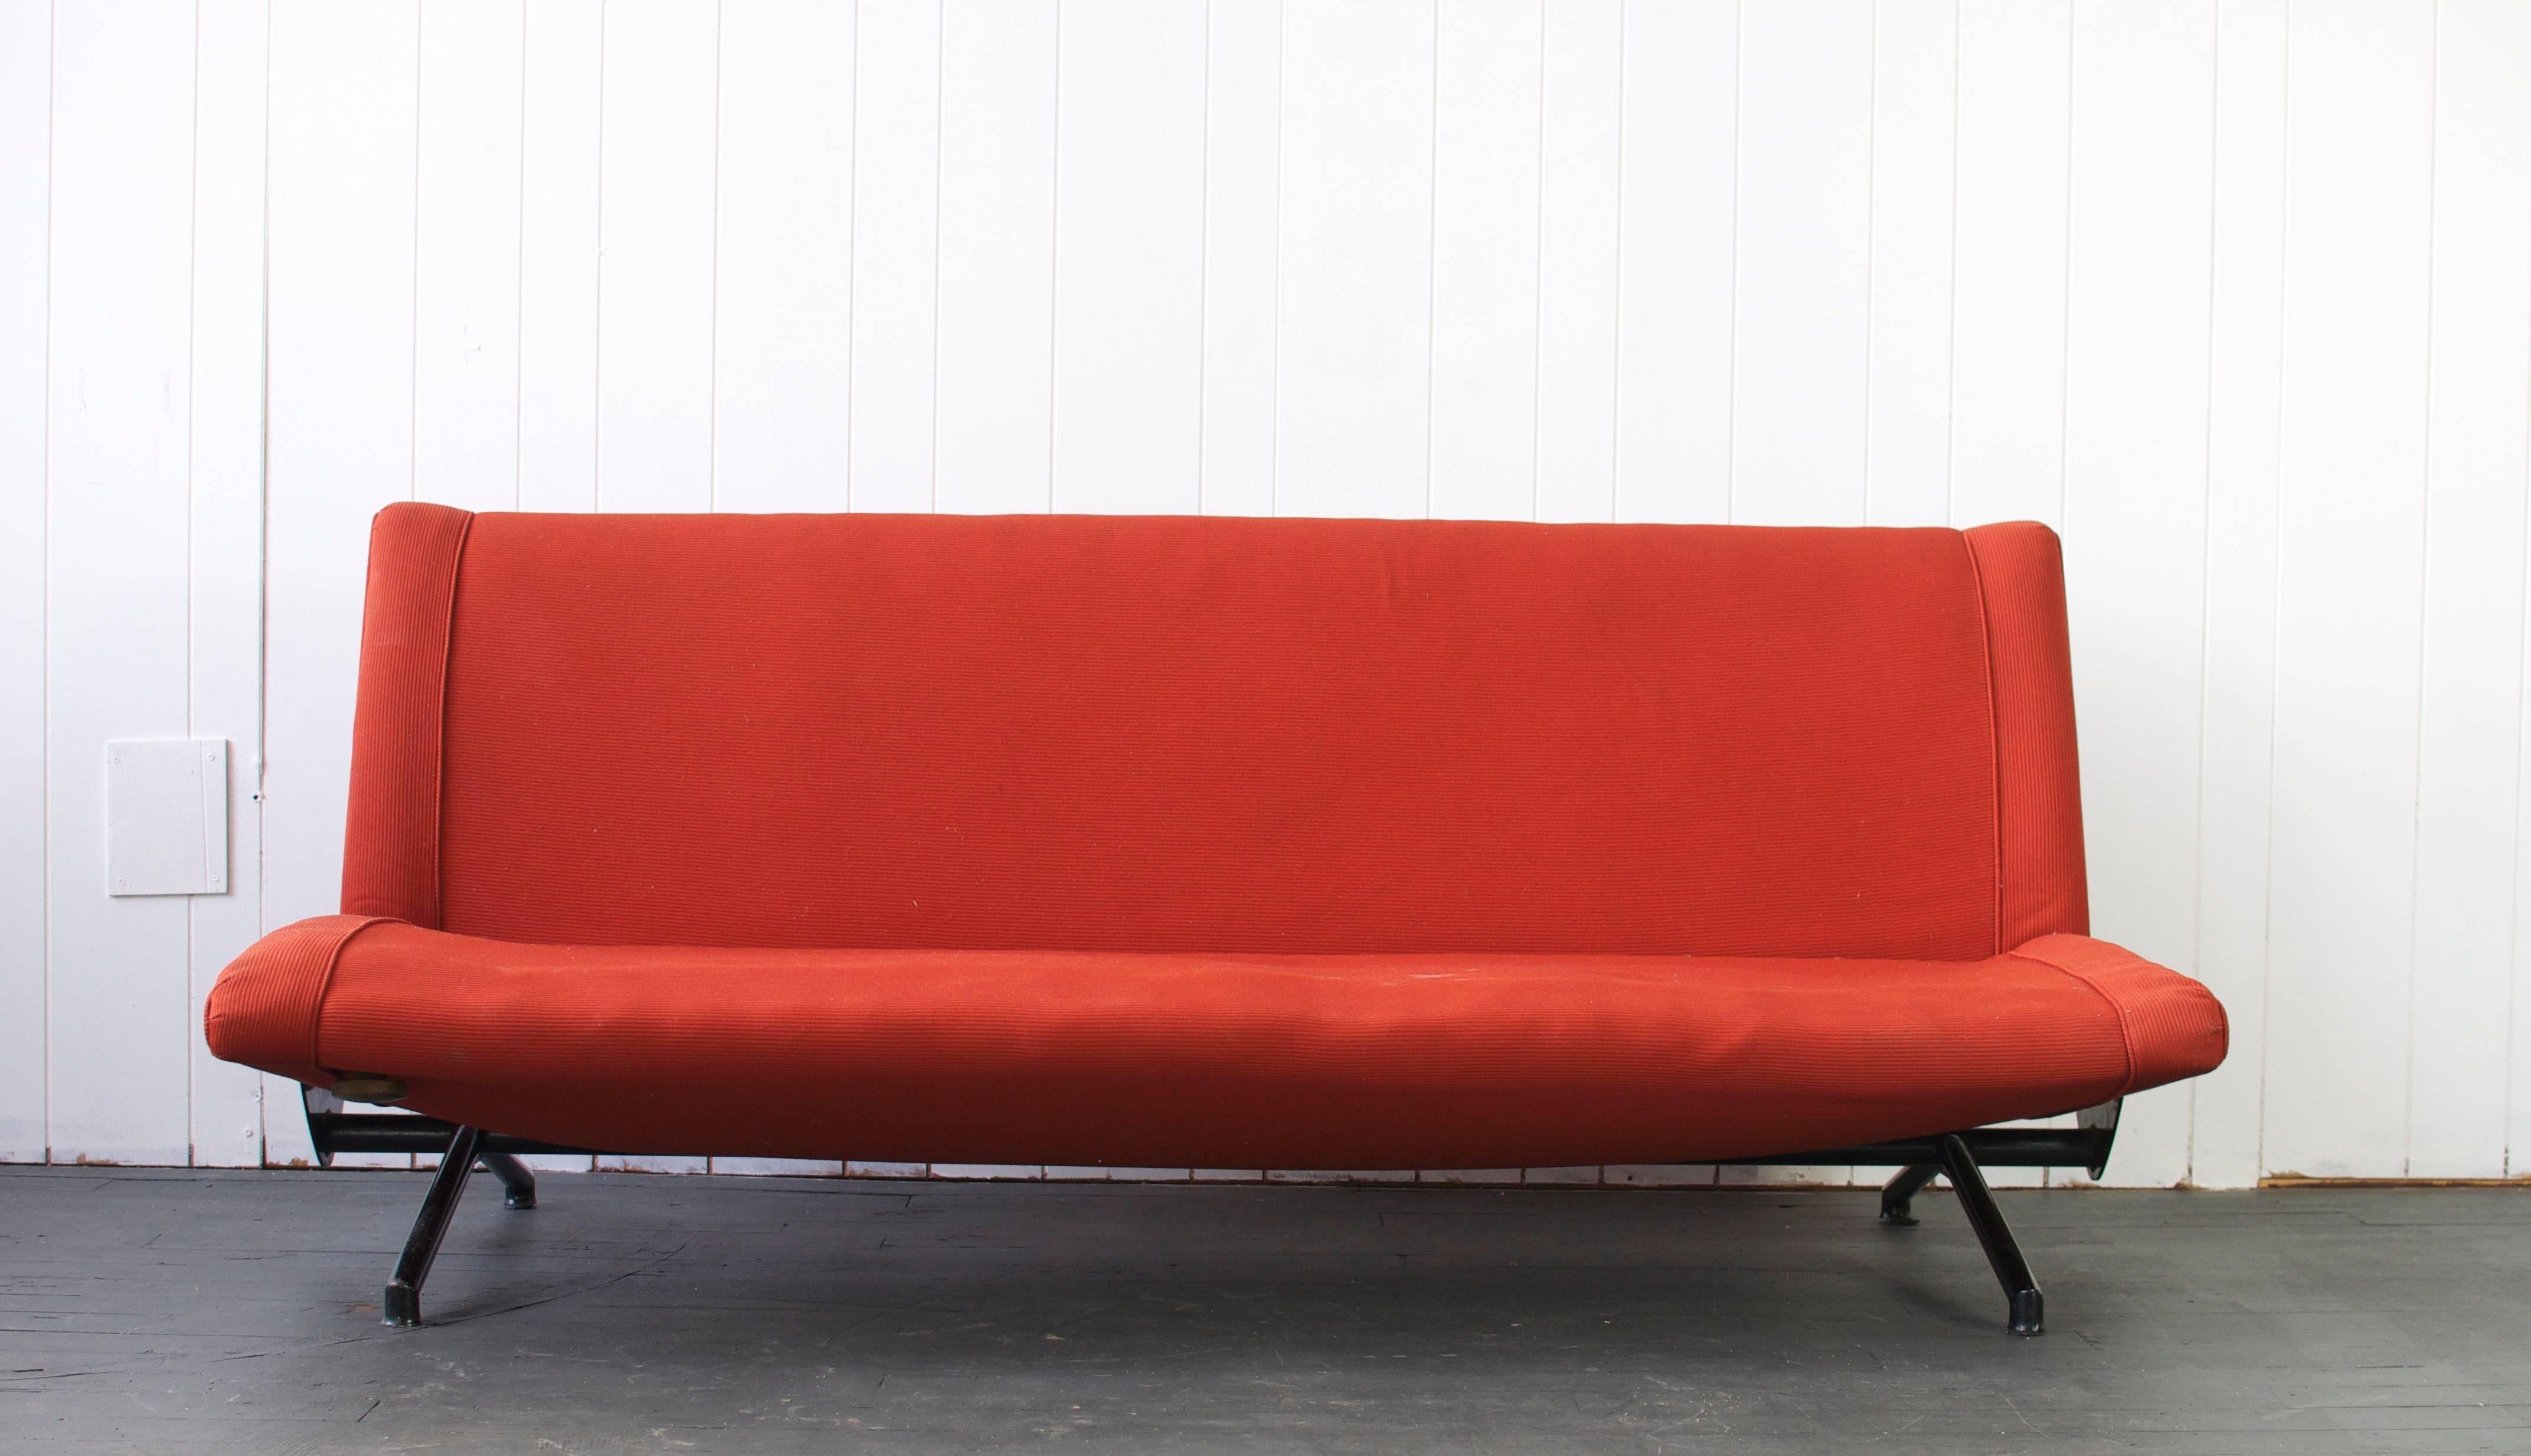 D70 sofa by Osvaldo Borsani for Tecno. Adjustable sofa. Can open flat and be used as a bed.